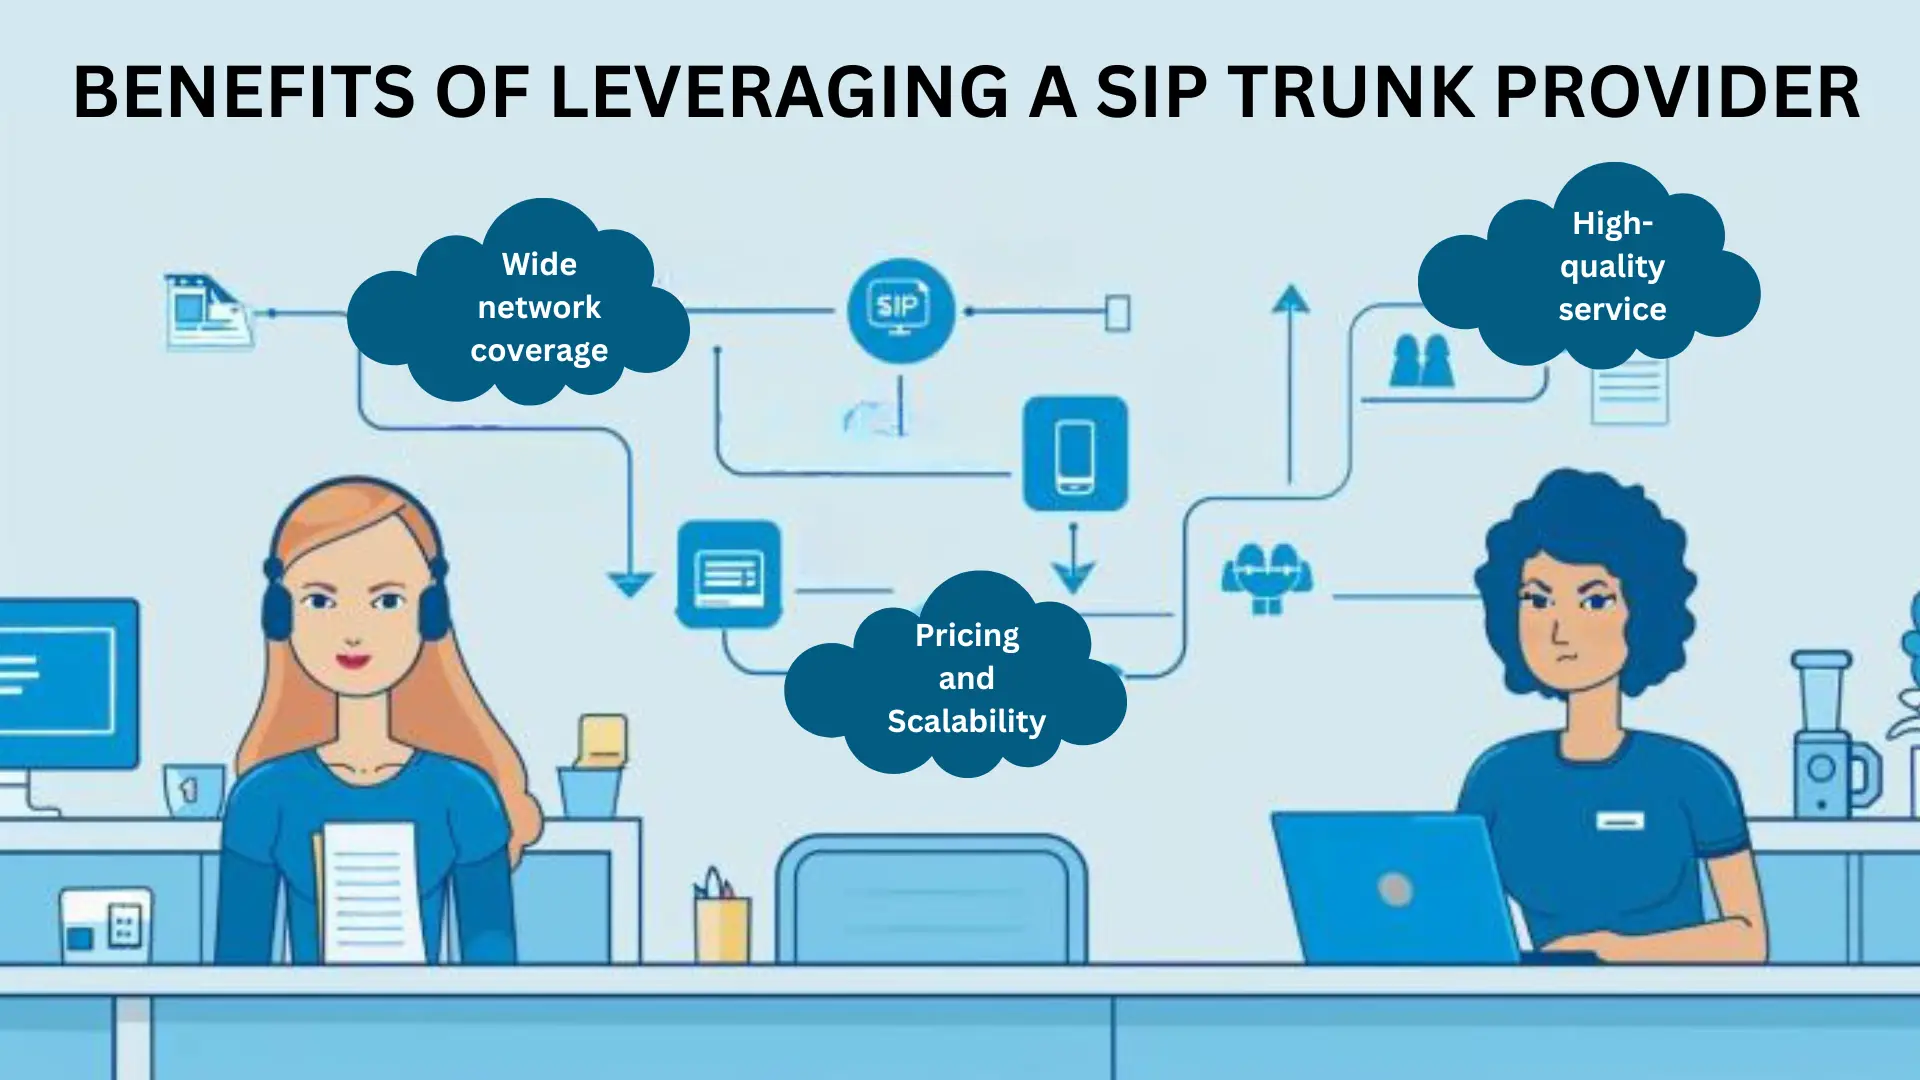 Benefits of Leveraging a SIP Trunk Providers